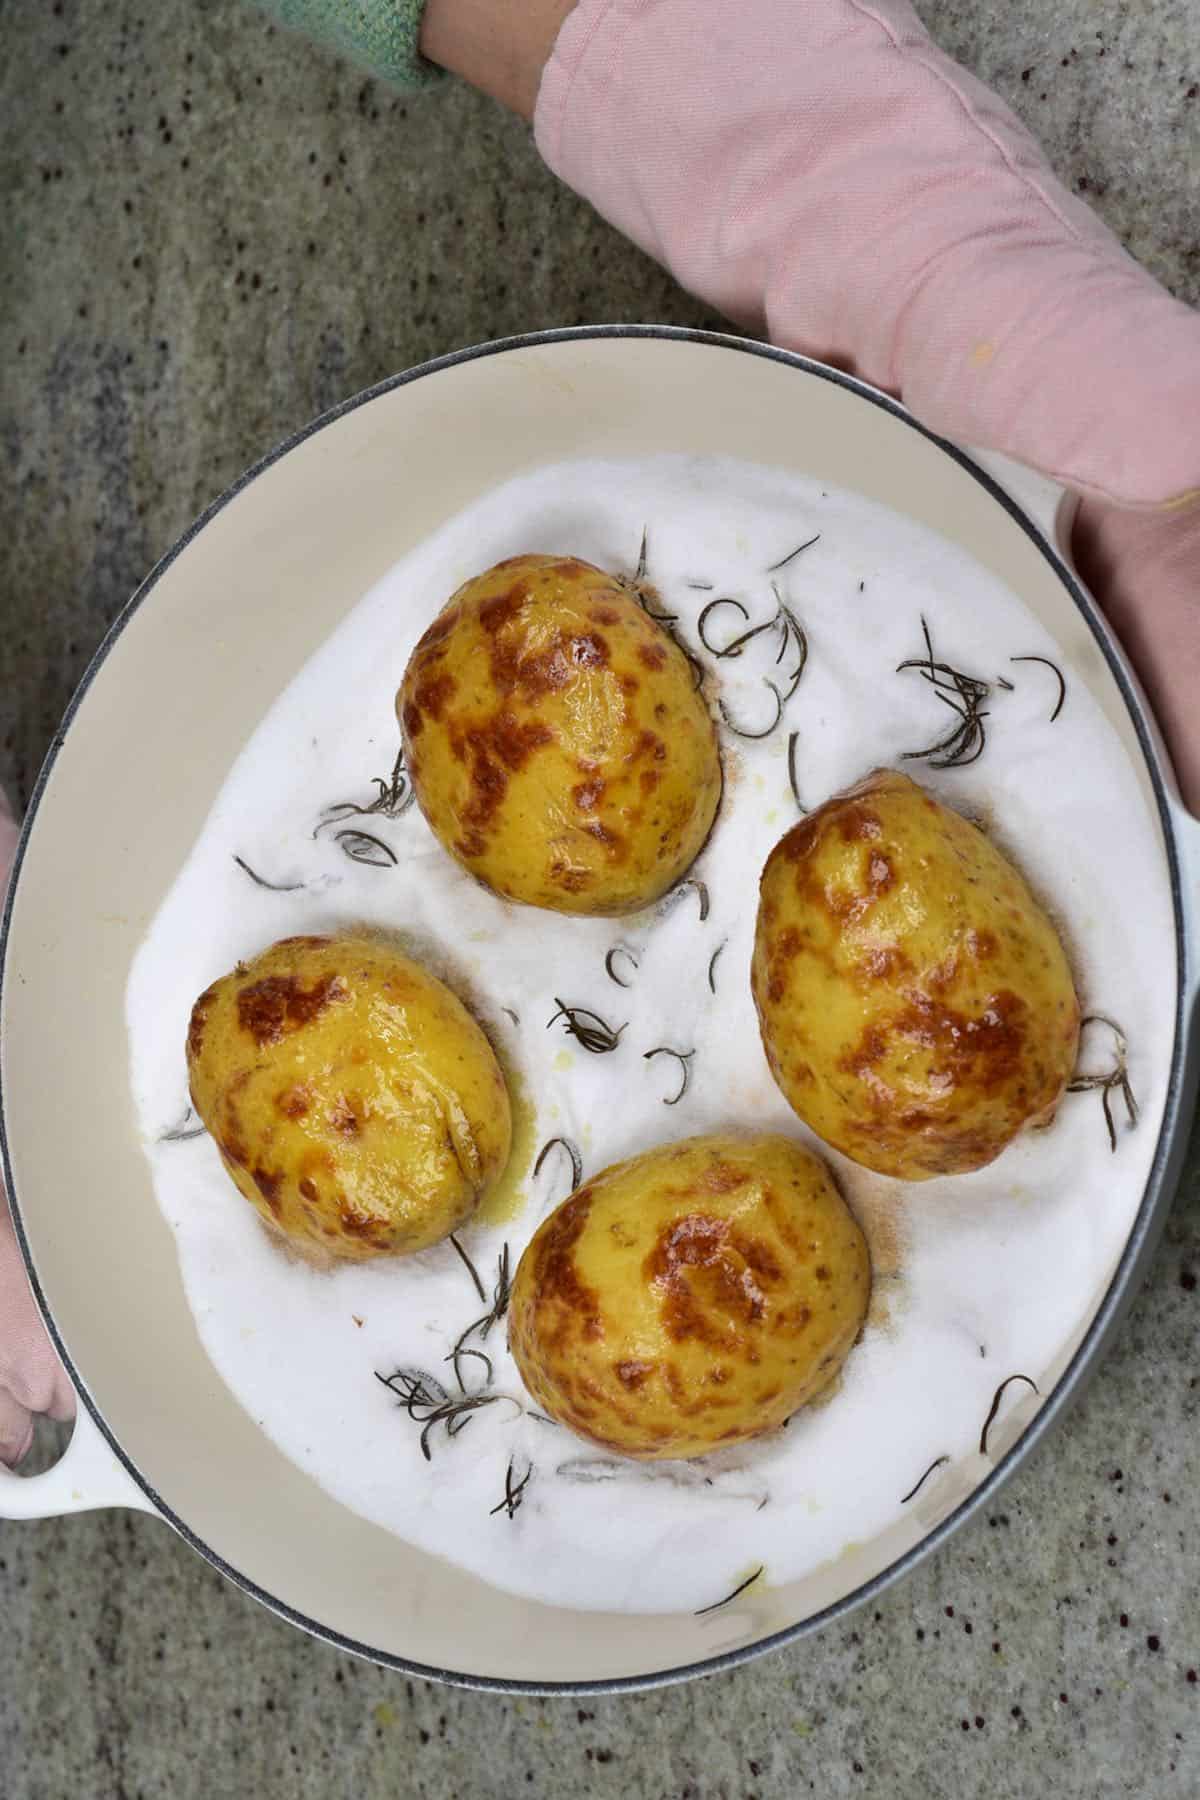 Four salt-baked potatoes in a baking dish